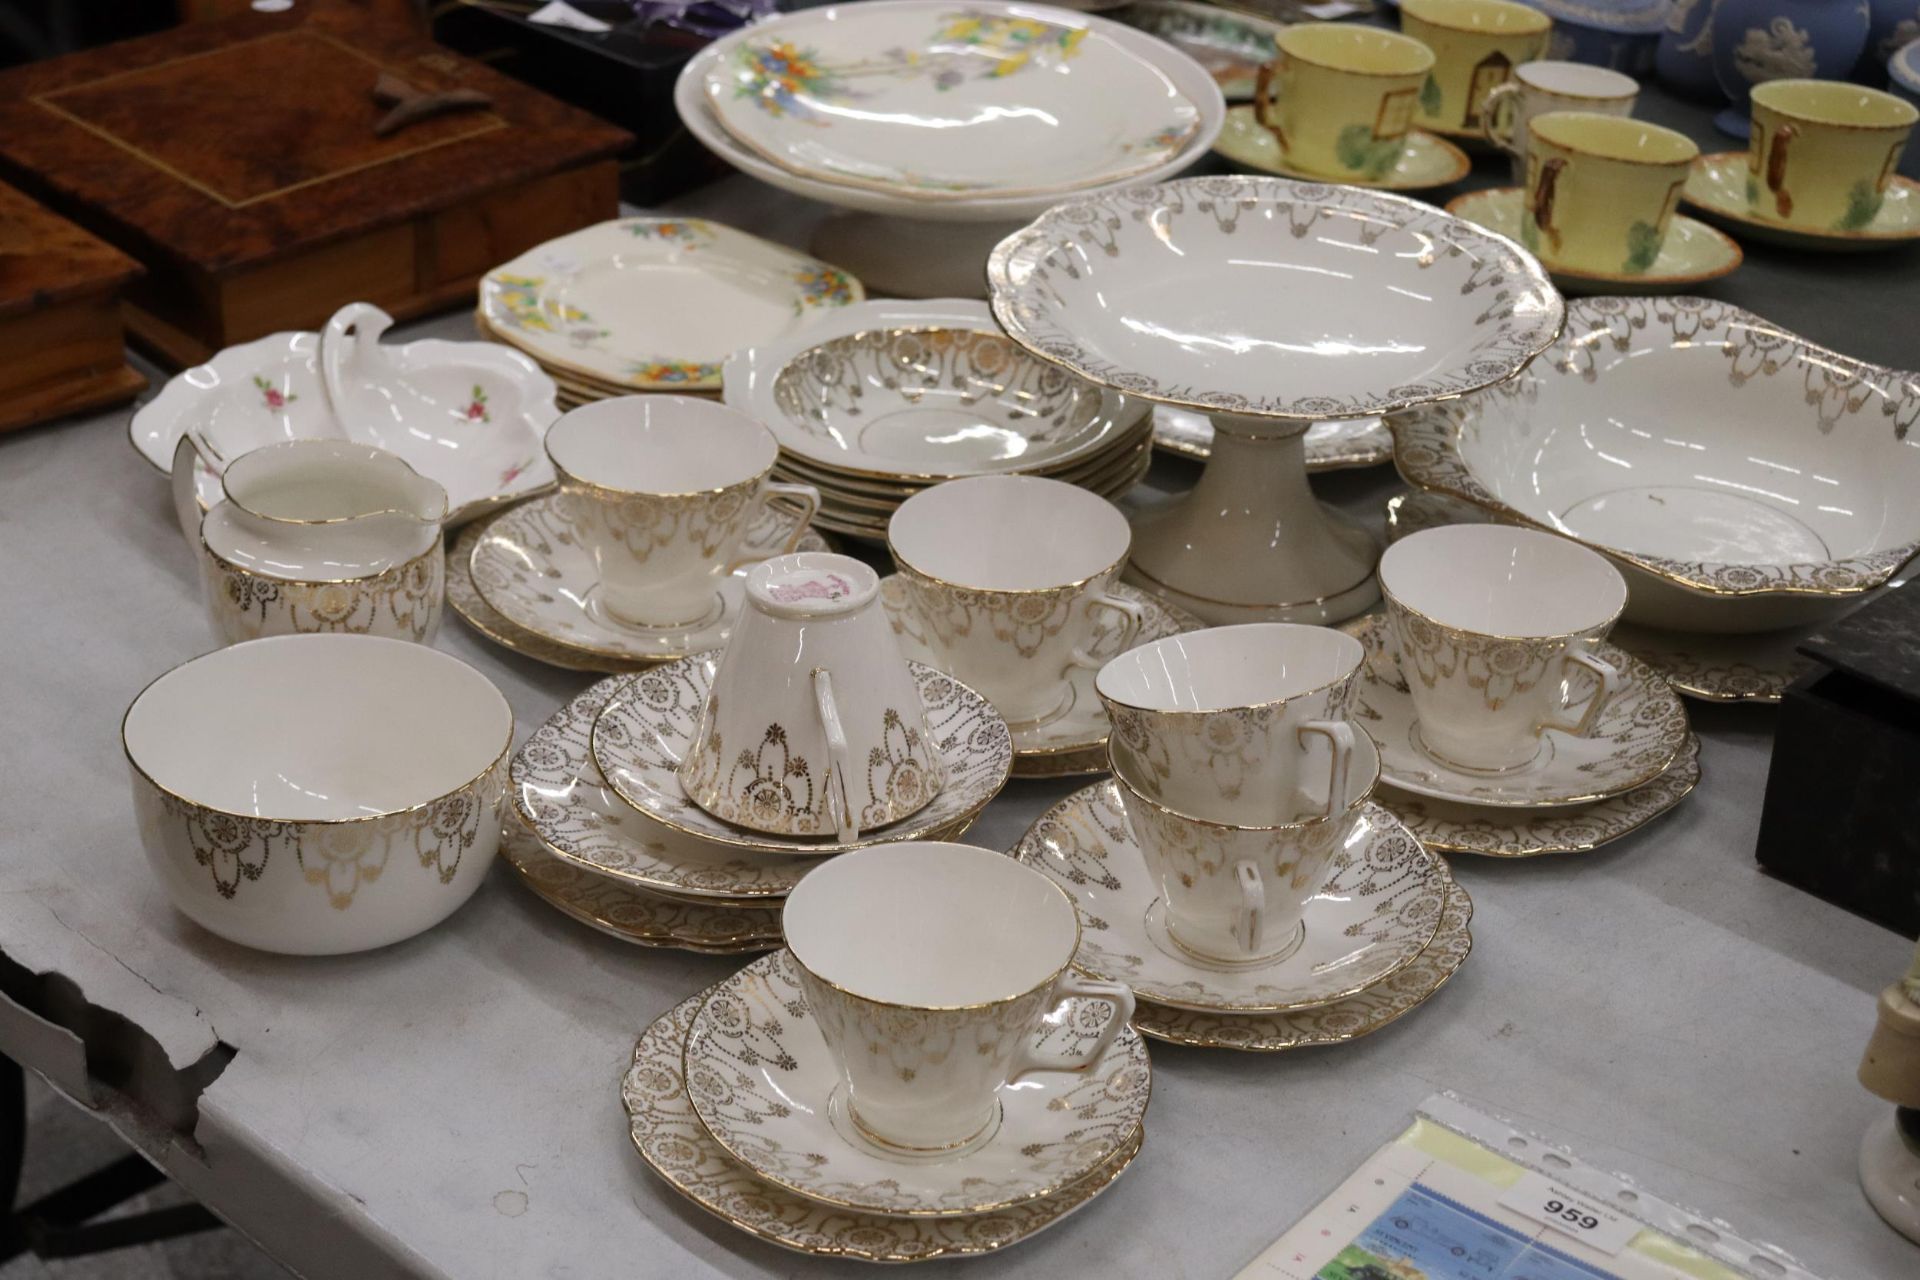 A VINTAGE 'PENDANT' TEASET, TO INCLUDE, A CAKE STAND, CAKE PLATE, BOWLS, A CREAM JUG, SUGAR BOWL, - Image 3 of 14